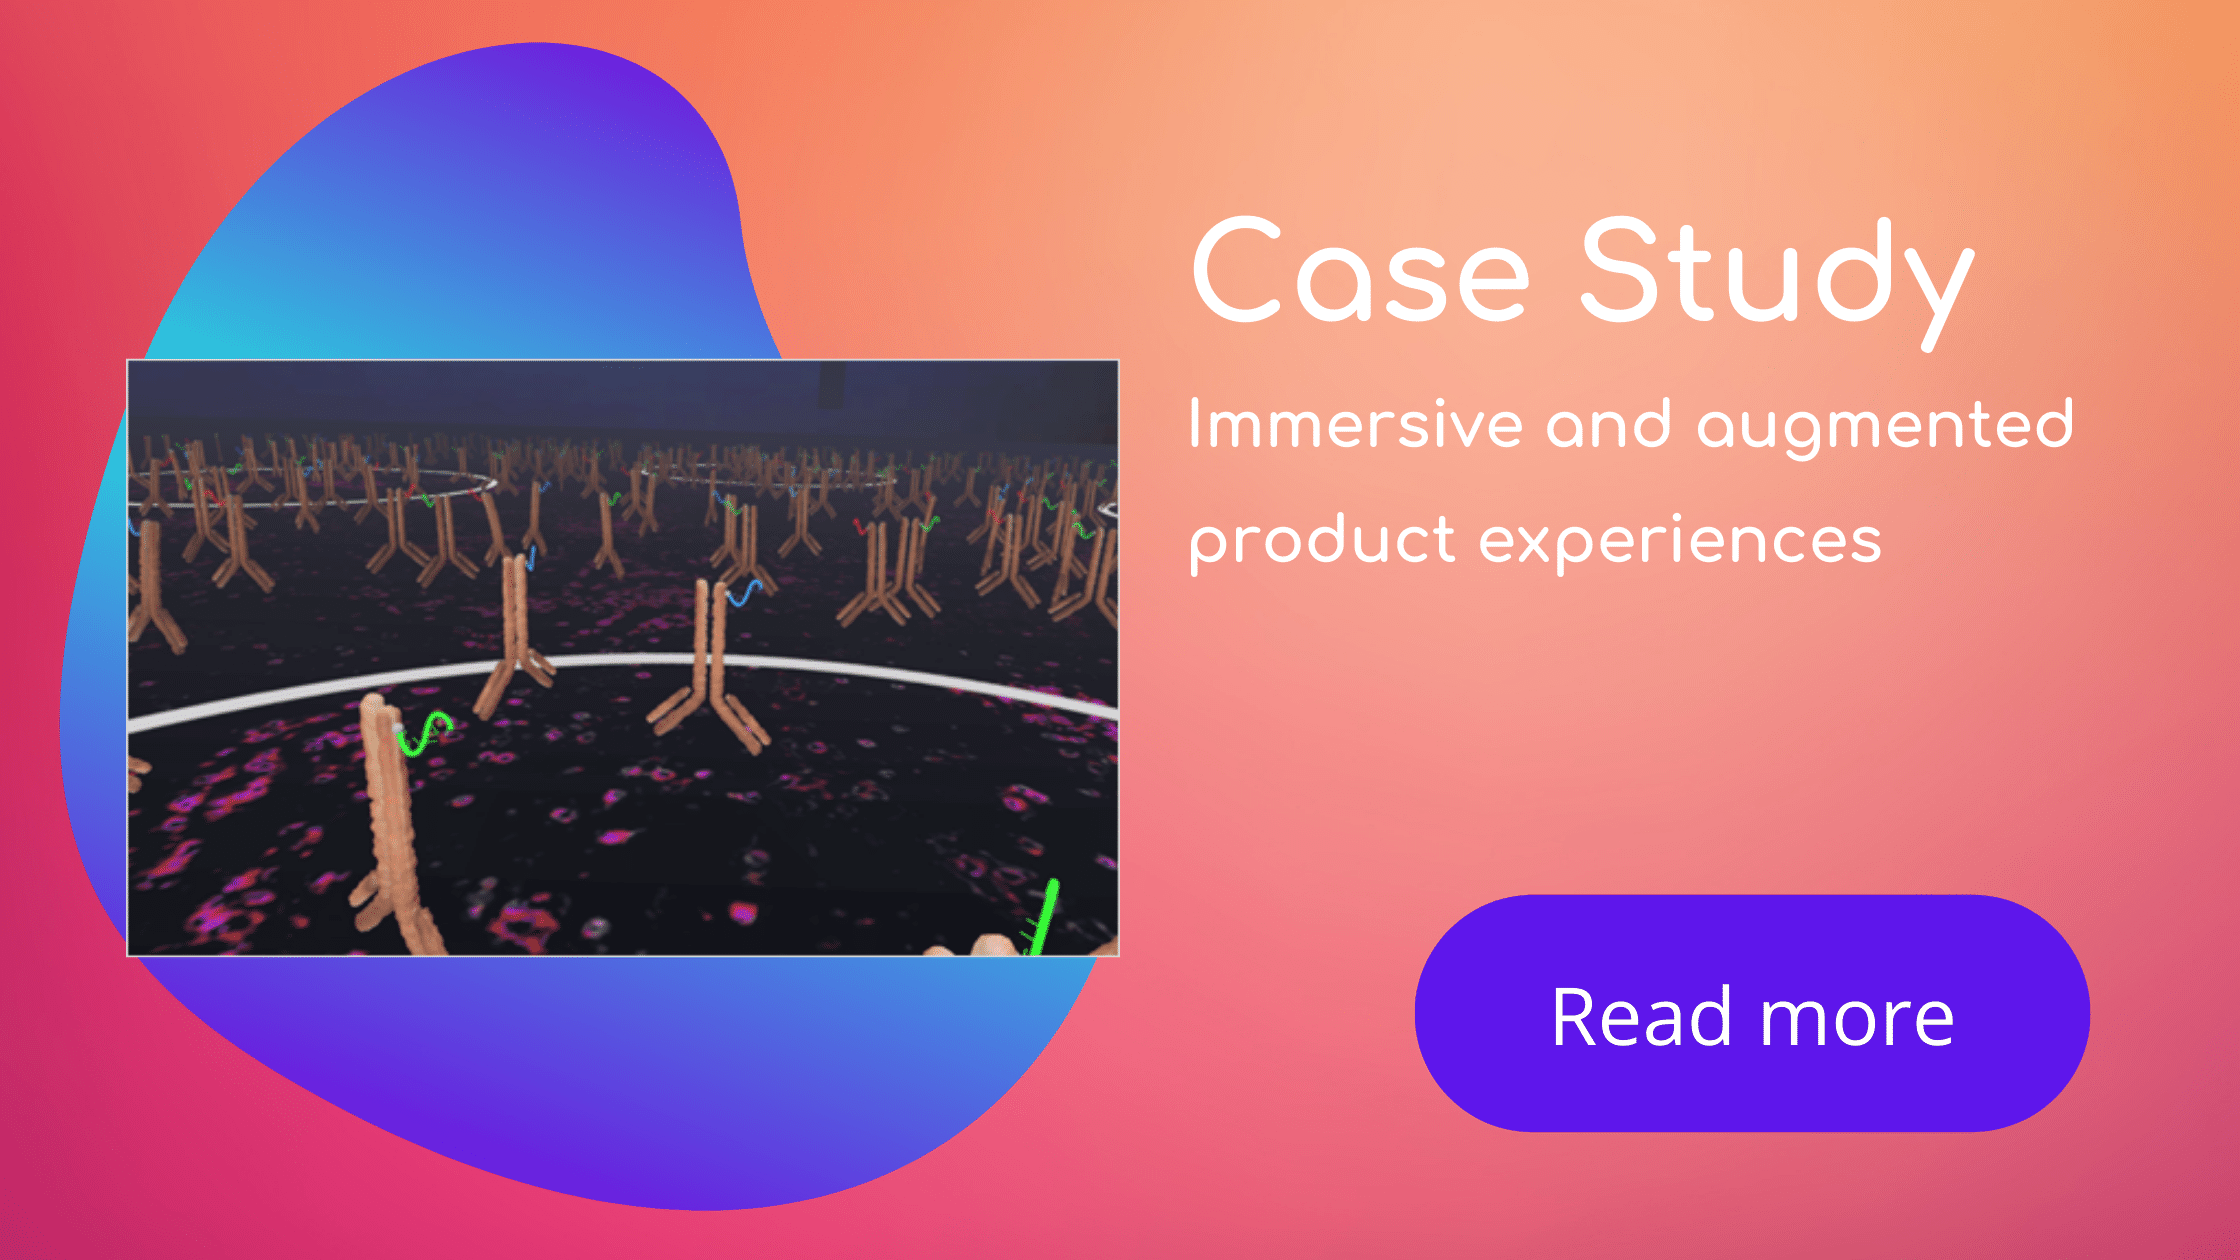 Immersive and augmented product experiences 